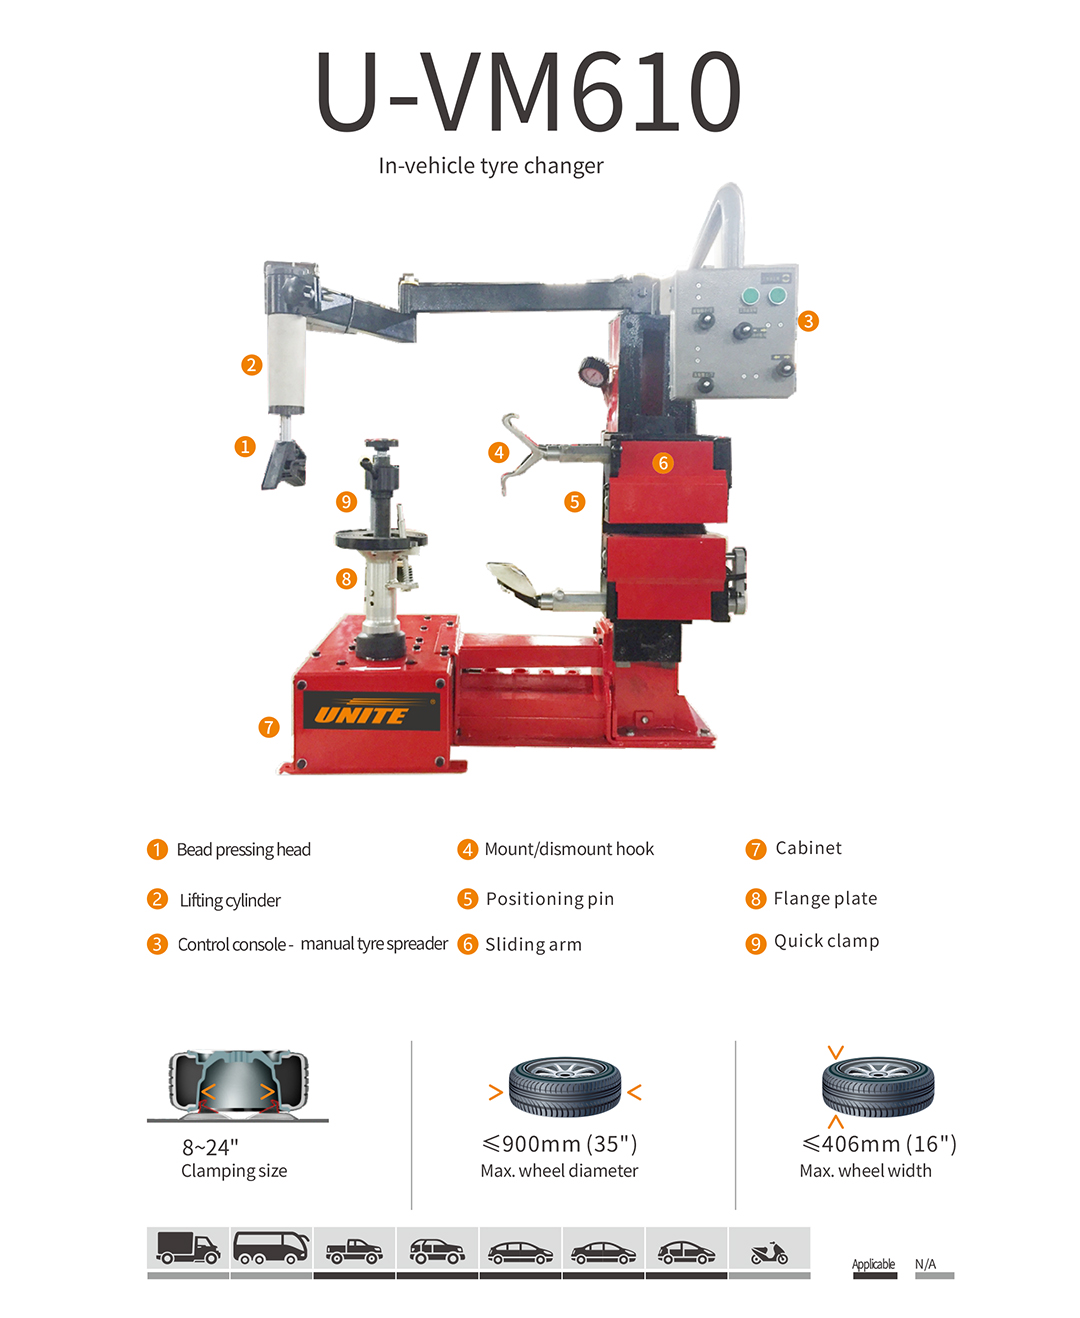 U-VM610 Mobile In-Vehicle Tyre changer for mobile service of cars, trucks, vans and SUVs vehicle tyres